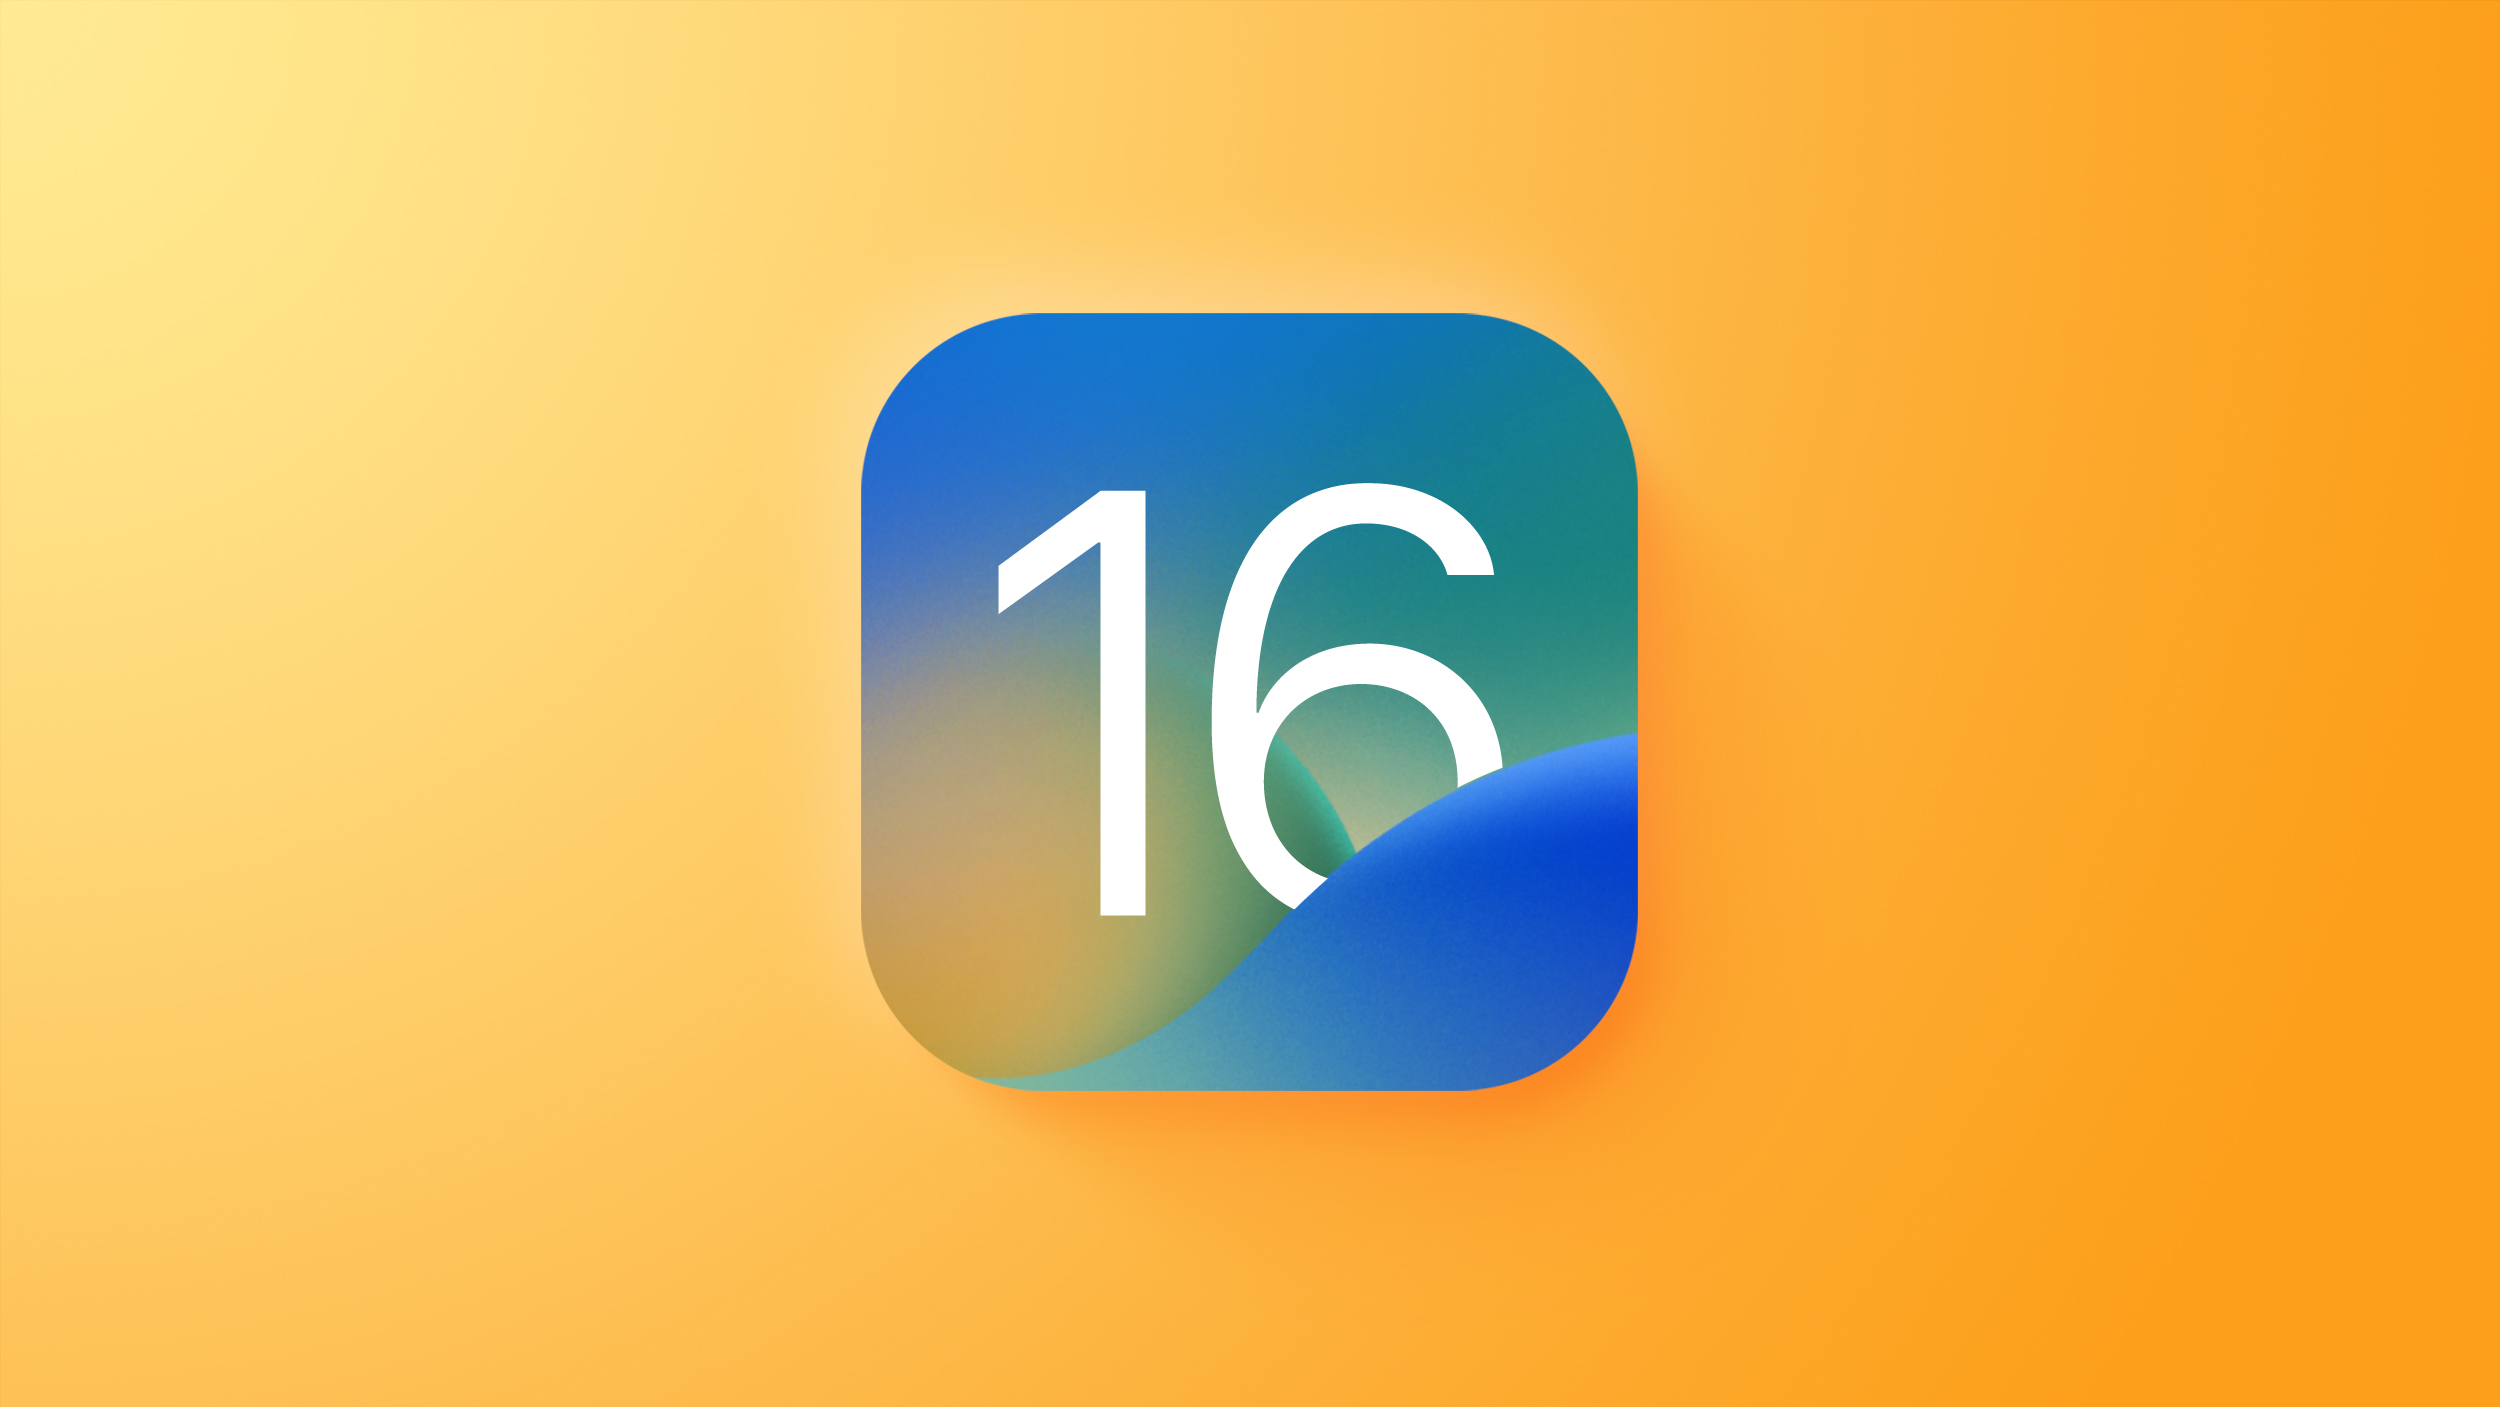 iOS 16.2 for iPhone Expected to Launch Next Week With These 12 New Features